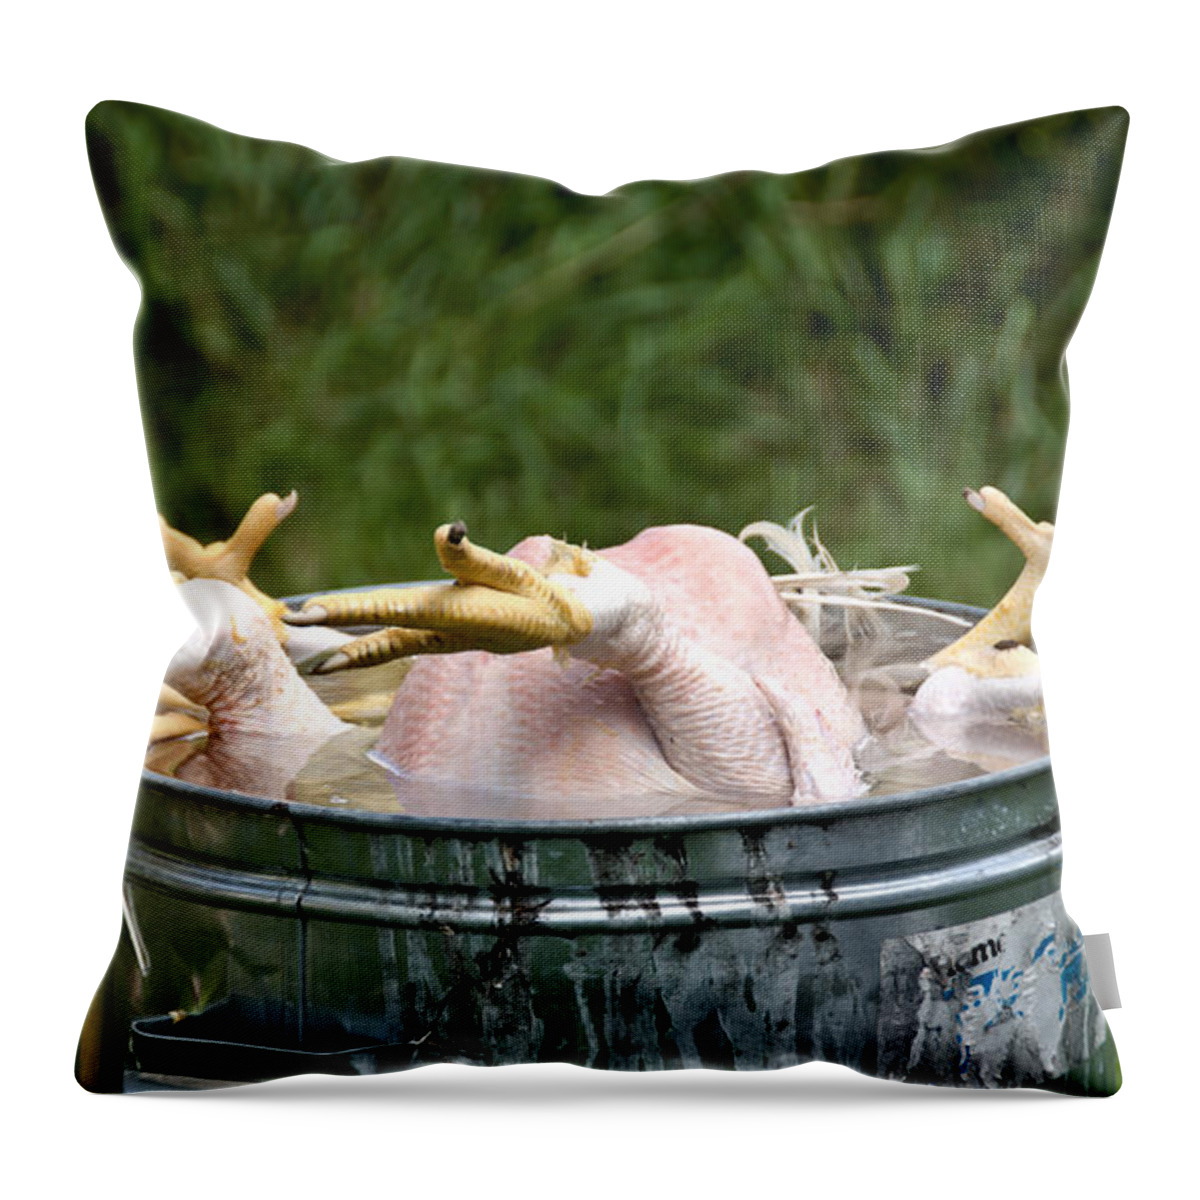 Chickens Throw Pillow featuring the photograph Chicken Feet by Cheryl Baxter